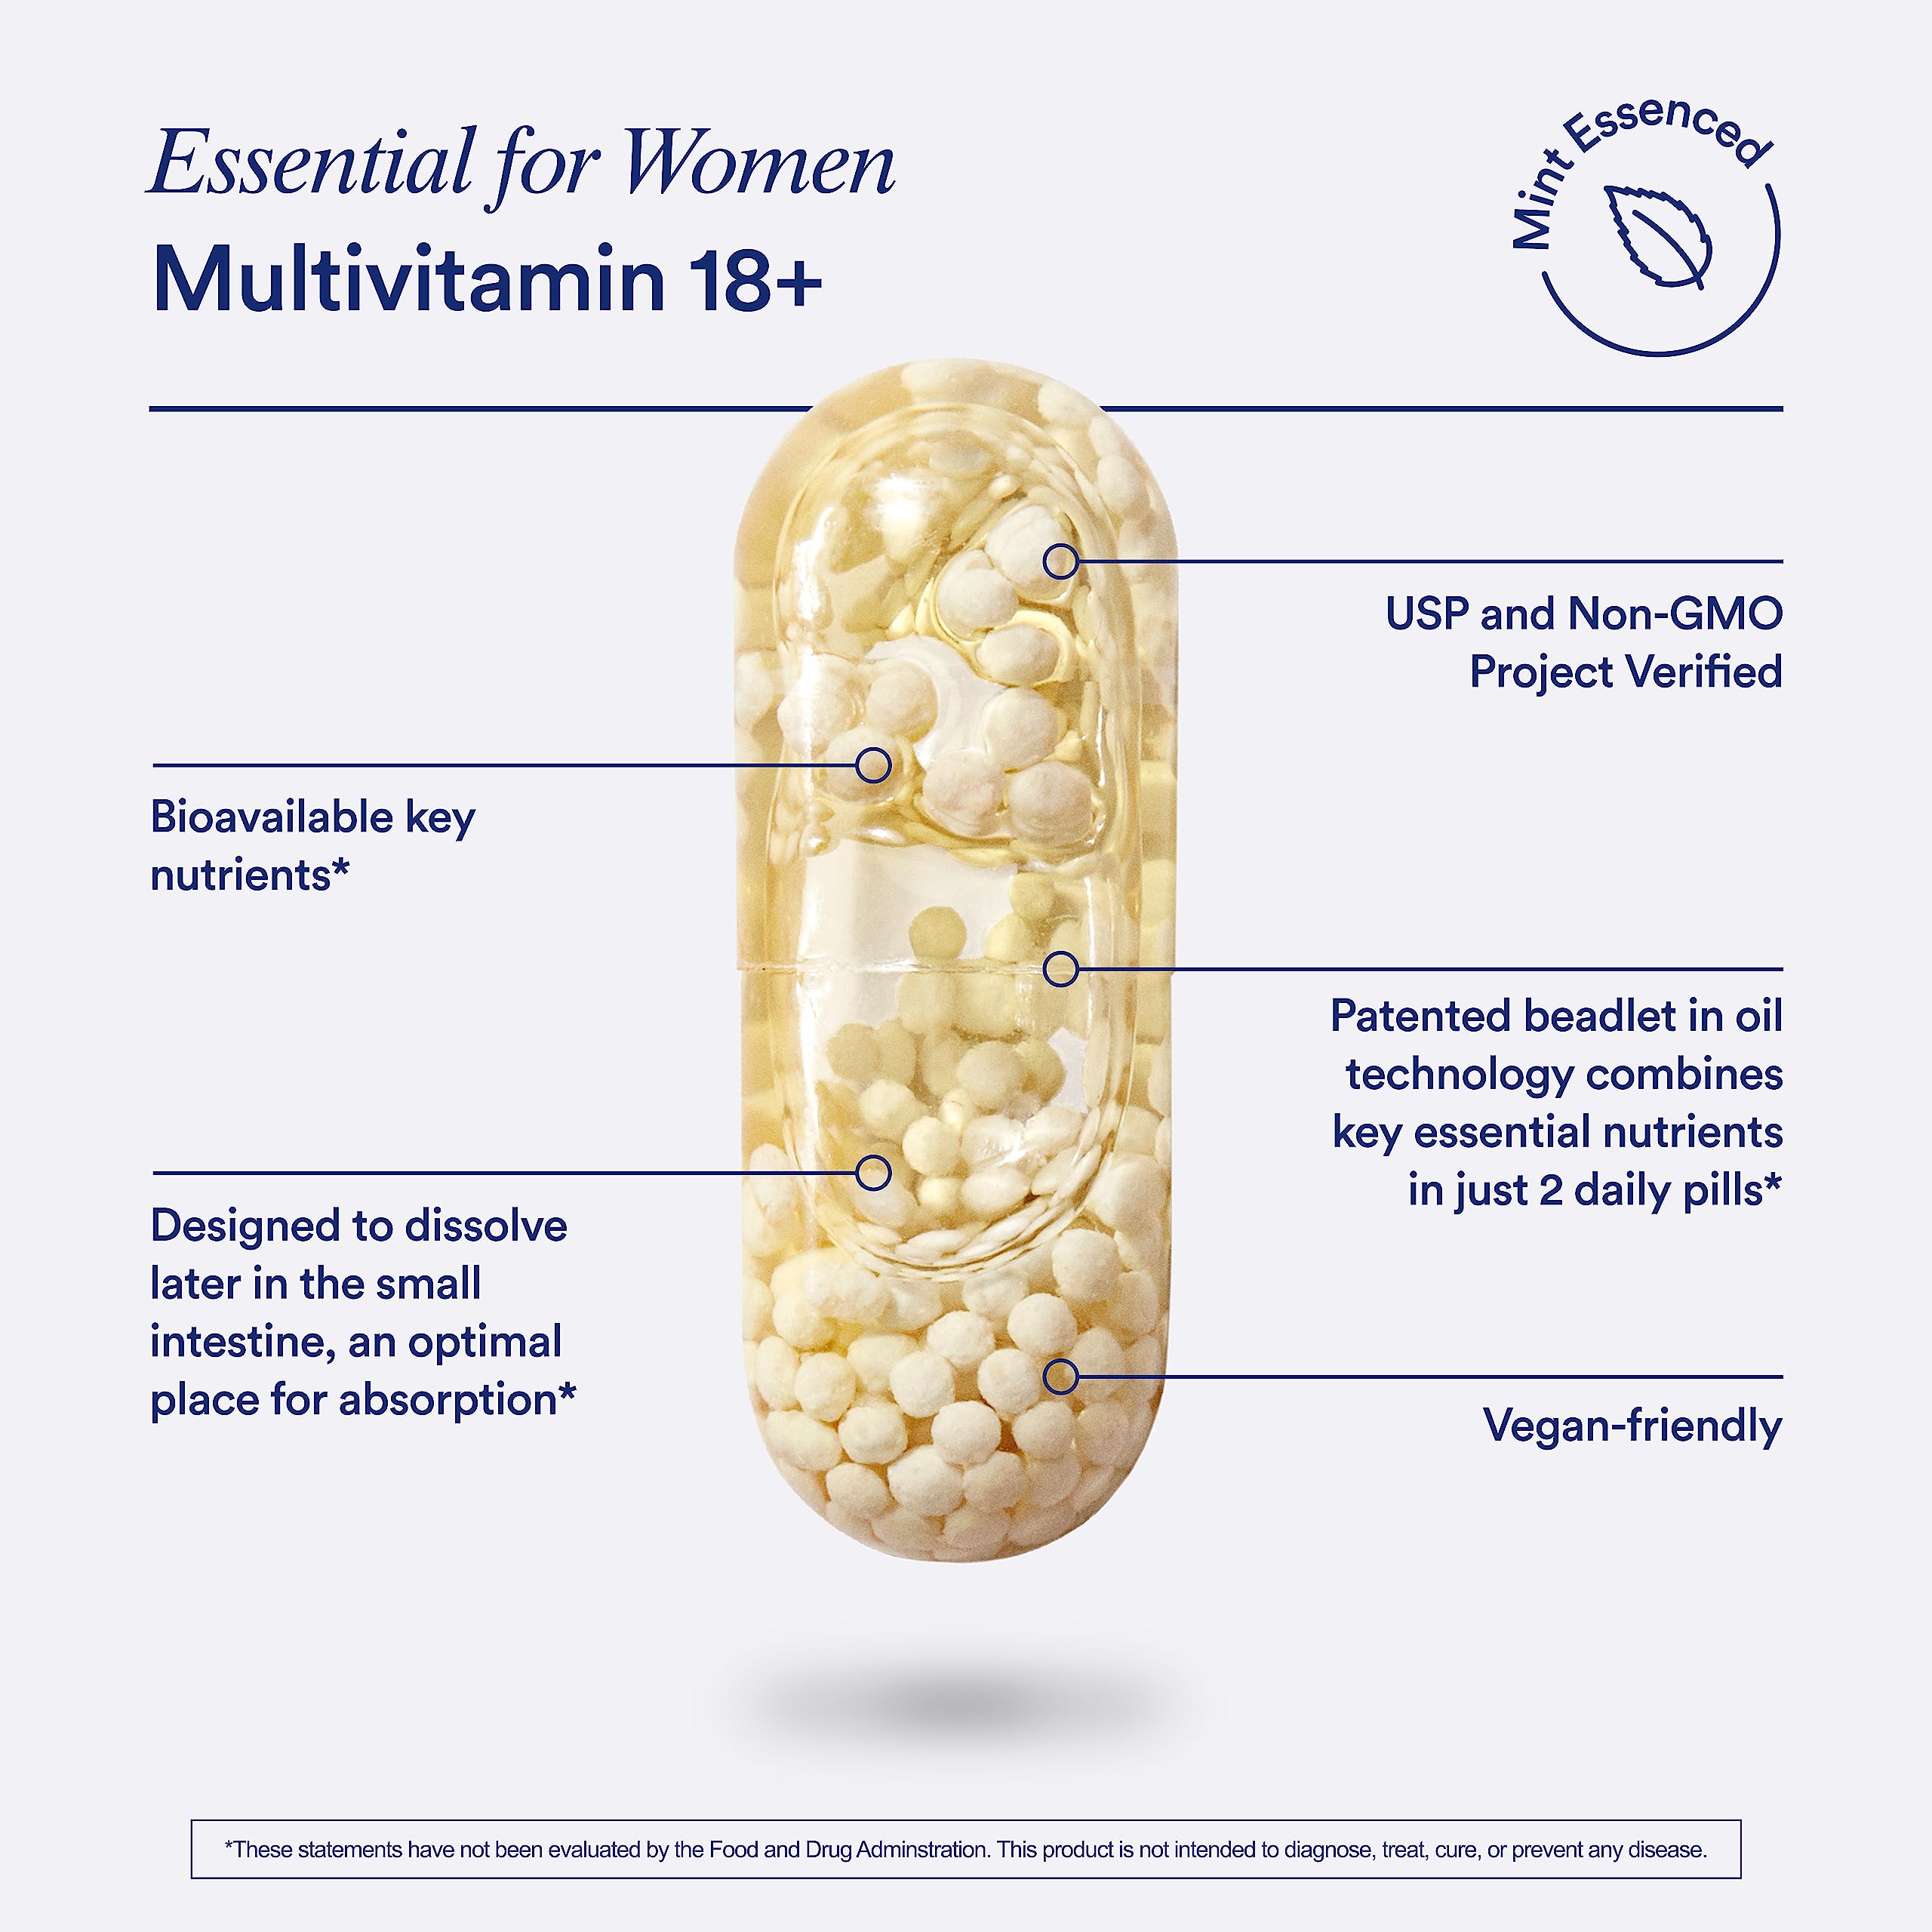 Ritual Multivitamin for Women 18+, Clinical-Backed Multivitamin with Vitamin D3 for Immune Support*, Vegan Omega 3 DHA, B12, Iron, Gluten Free, Non GMO, USP Verifed, 30 Day Supply, 60 Capsules